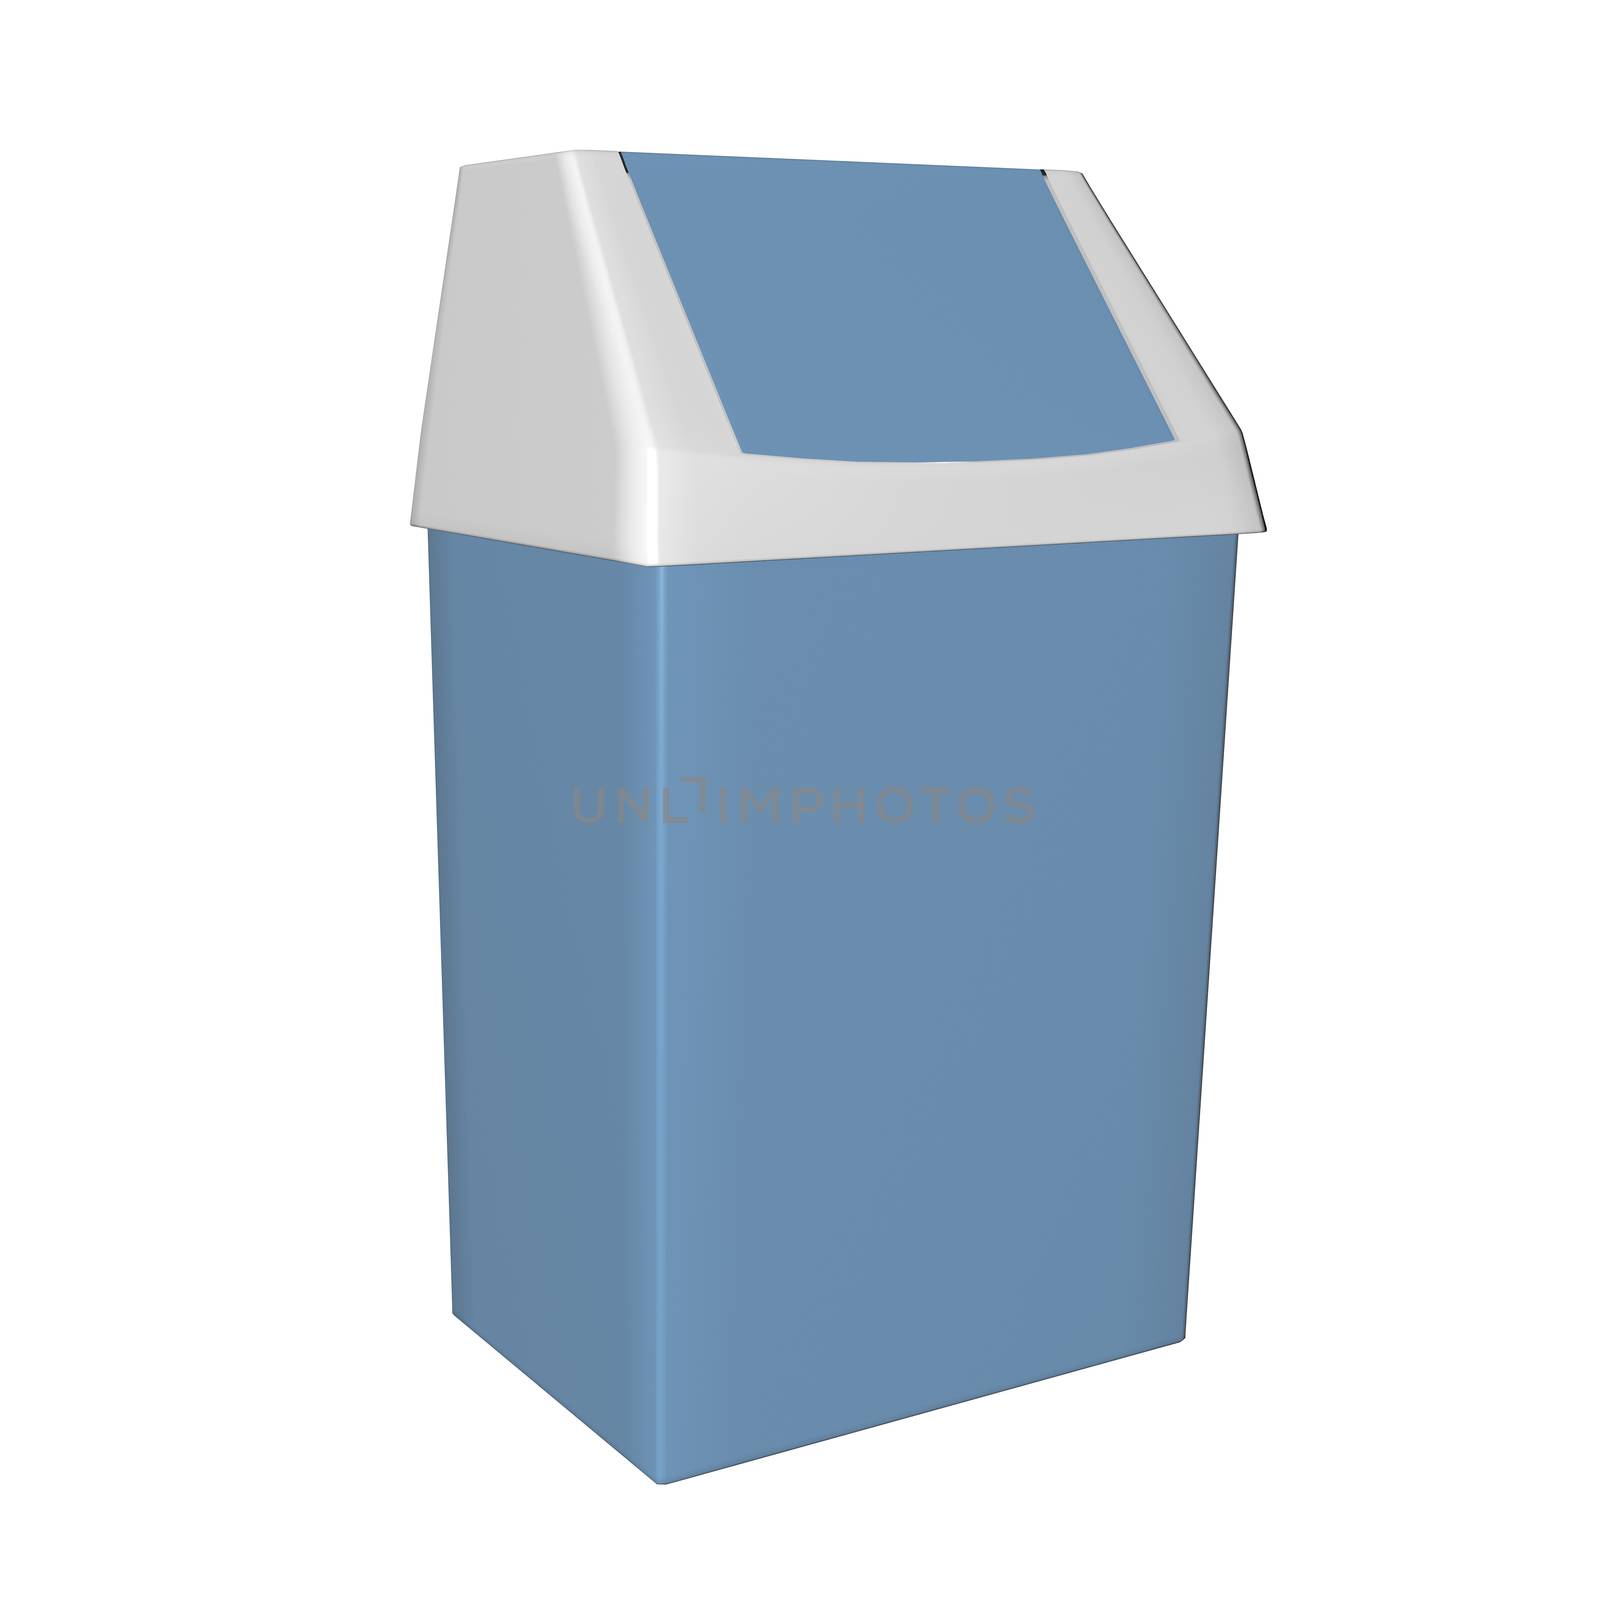 Plastic blue and white trash bin, 3D illustration, isolated against a white background